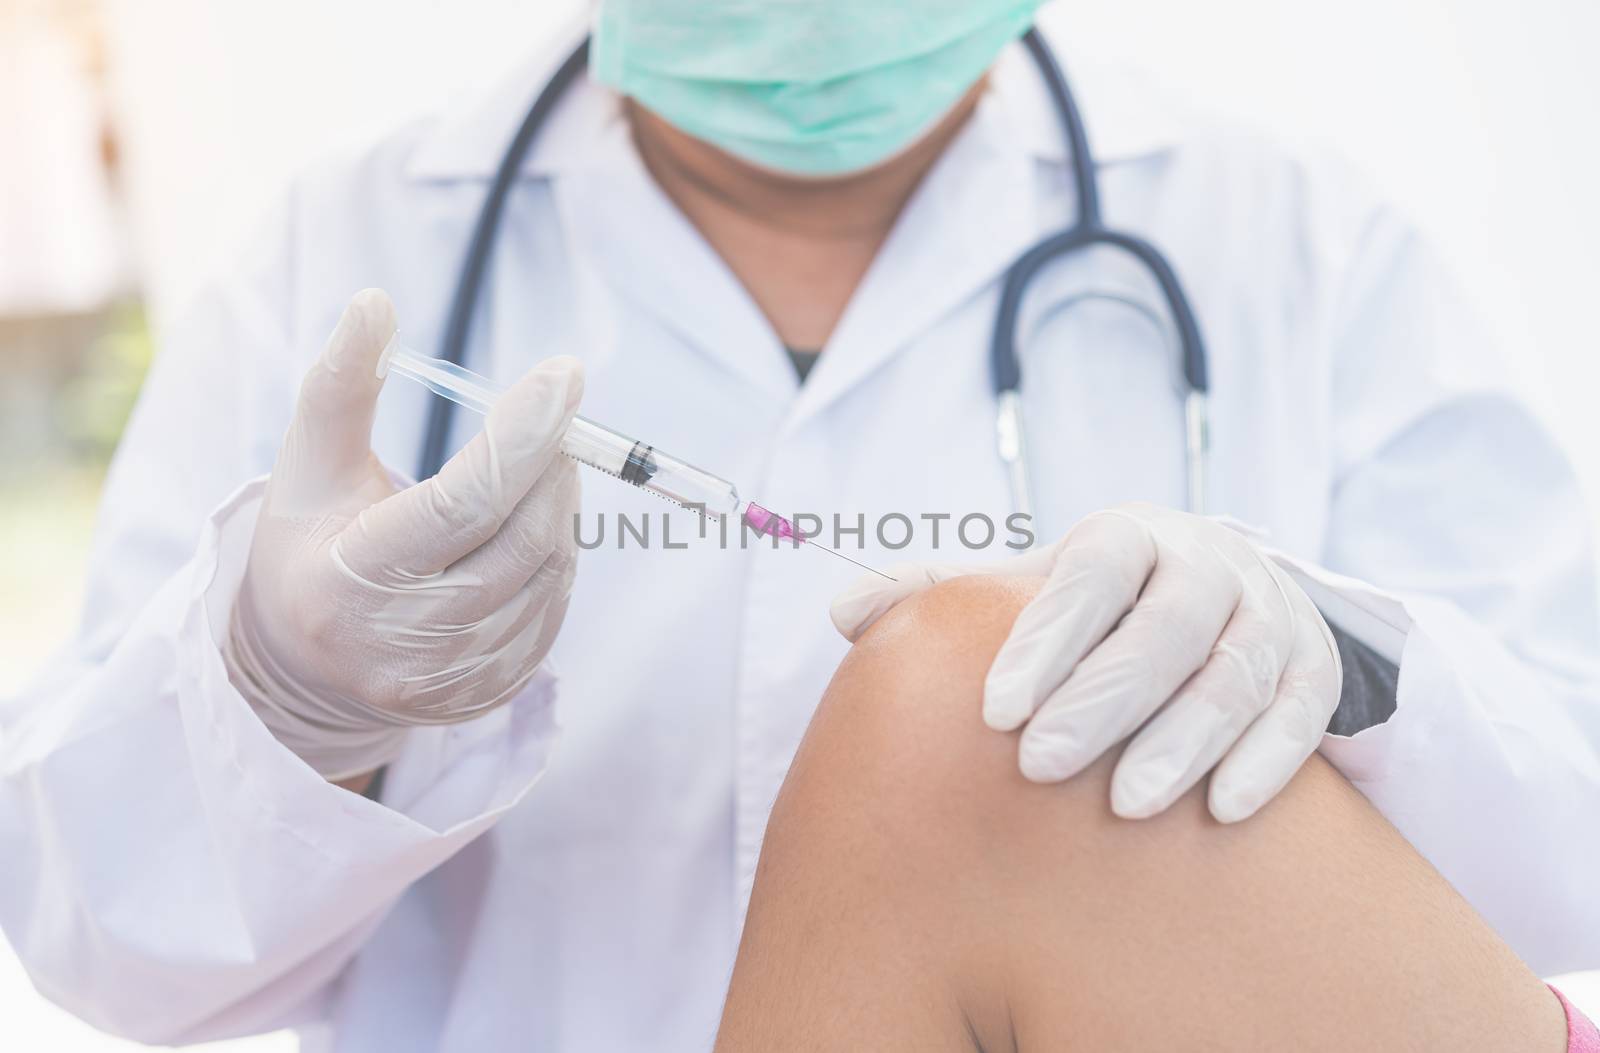 The doctor provided treatment for knee pain by injection. by photobyphotoboy